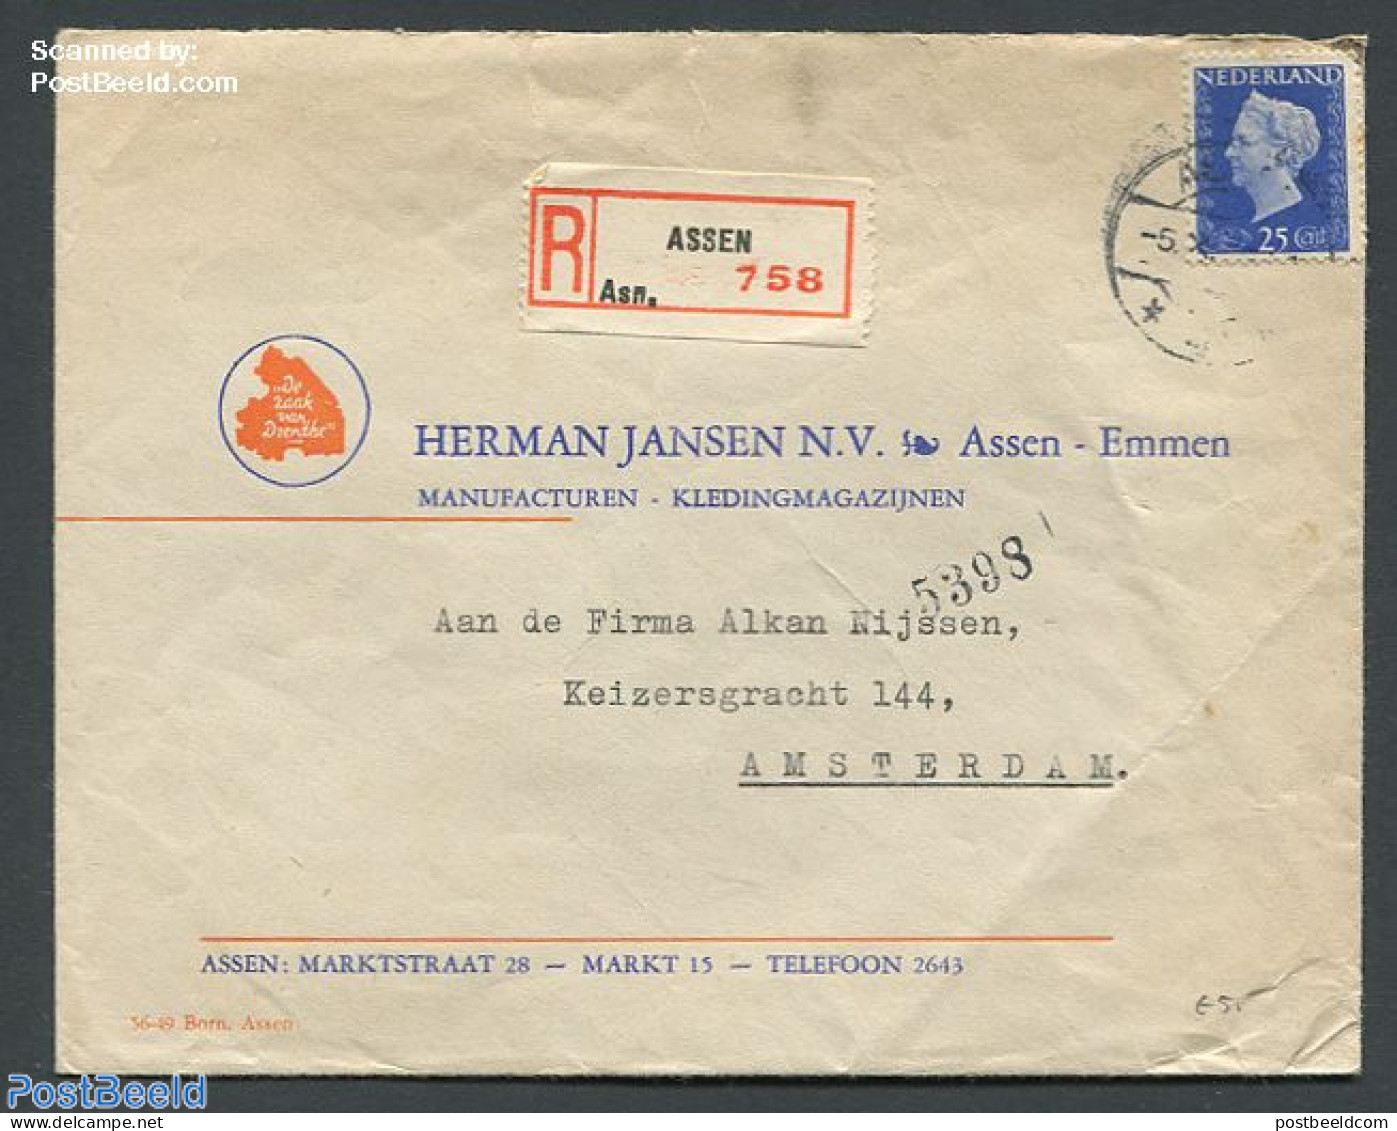 Netherlands 1947 Registered Cover Assen To Amsterdam With Nvhp 483, Postal History, History - Kings & Queens (Royalty) - Covers & Documents